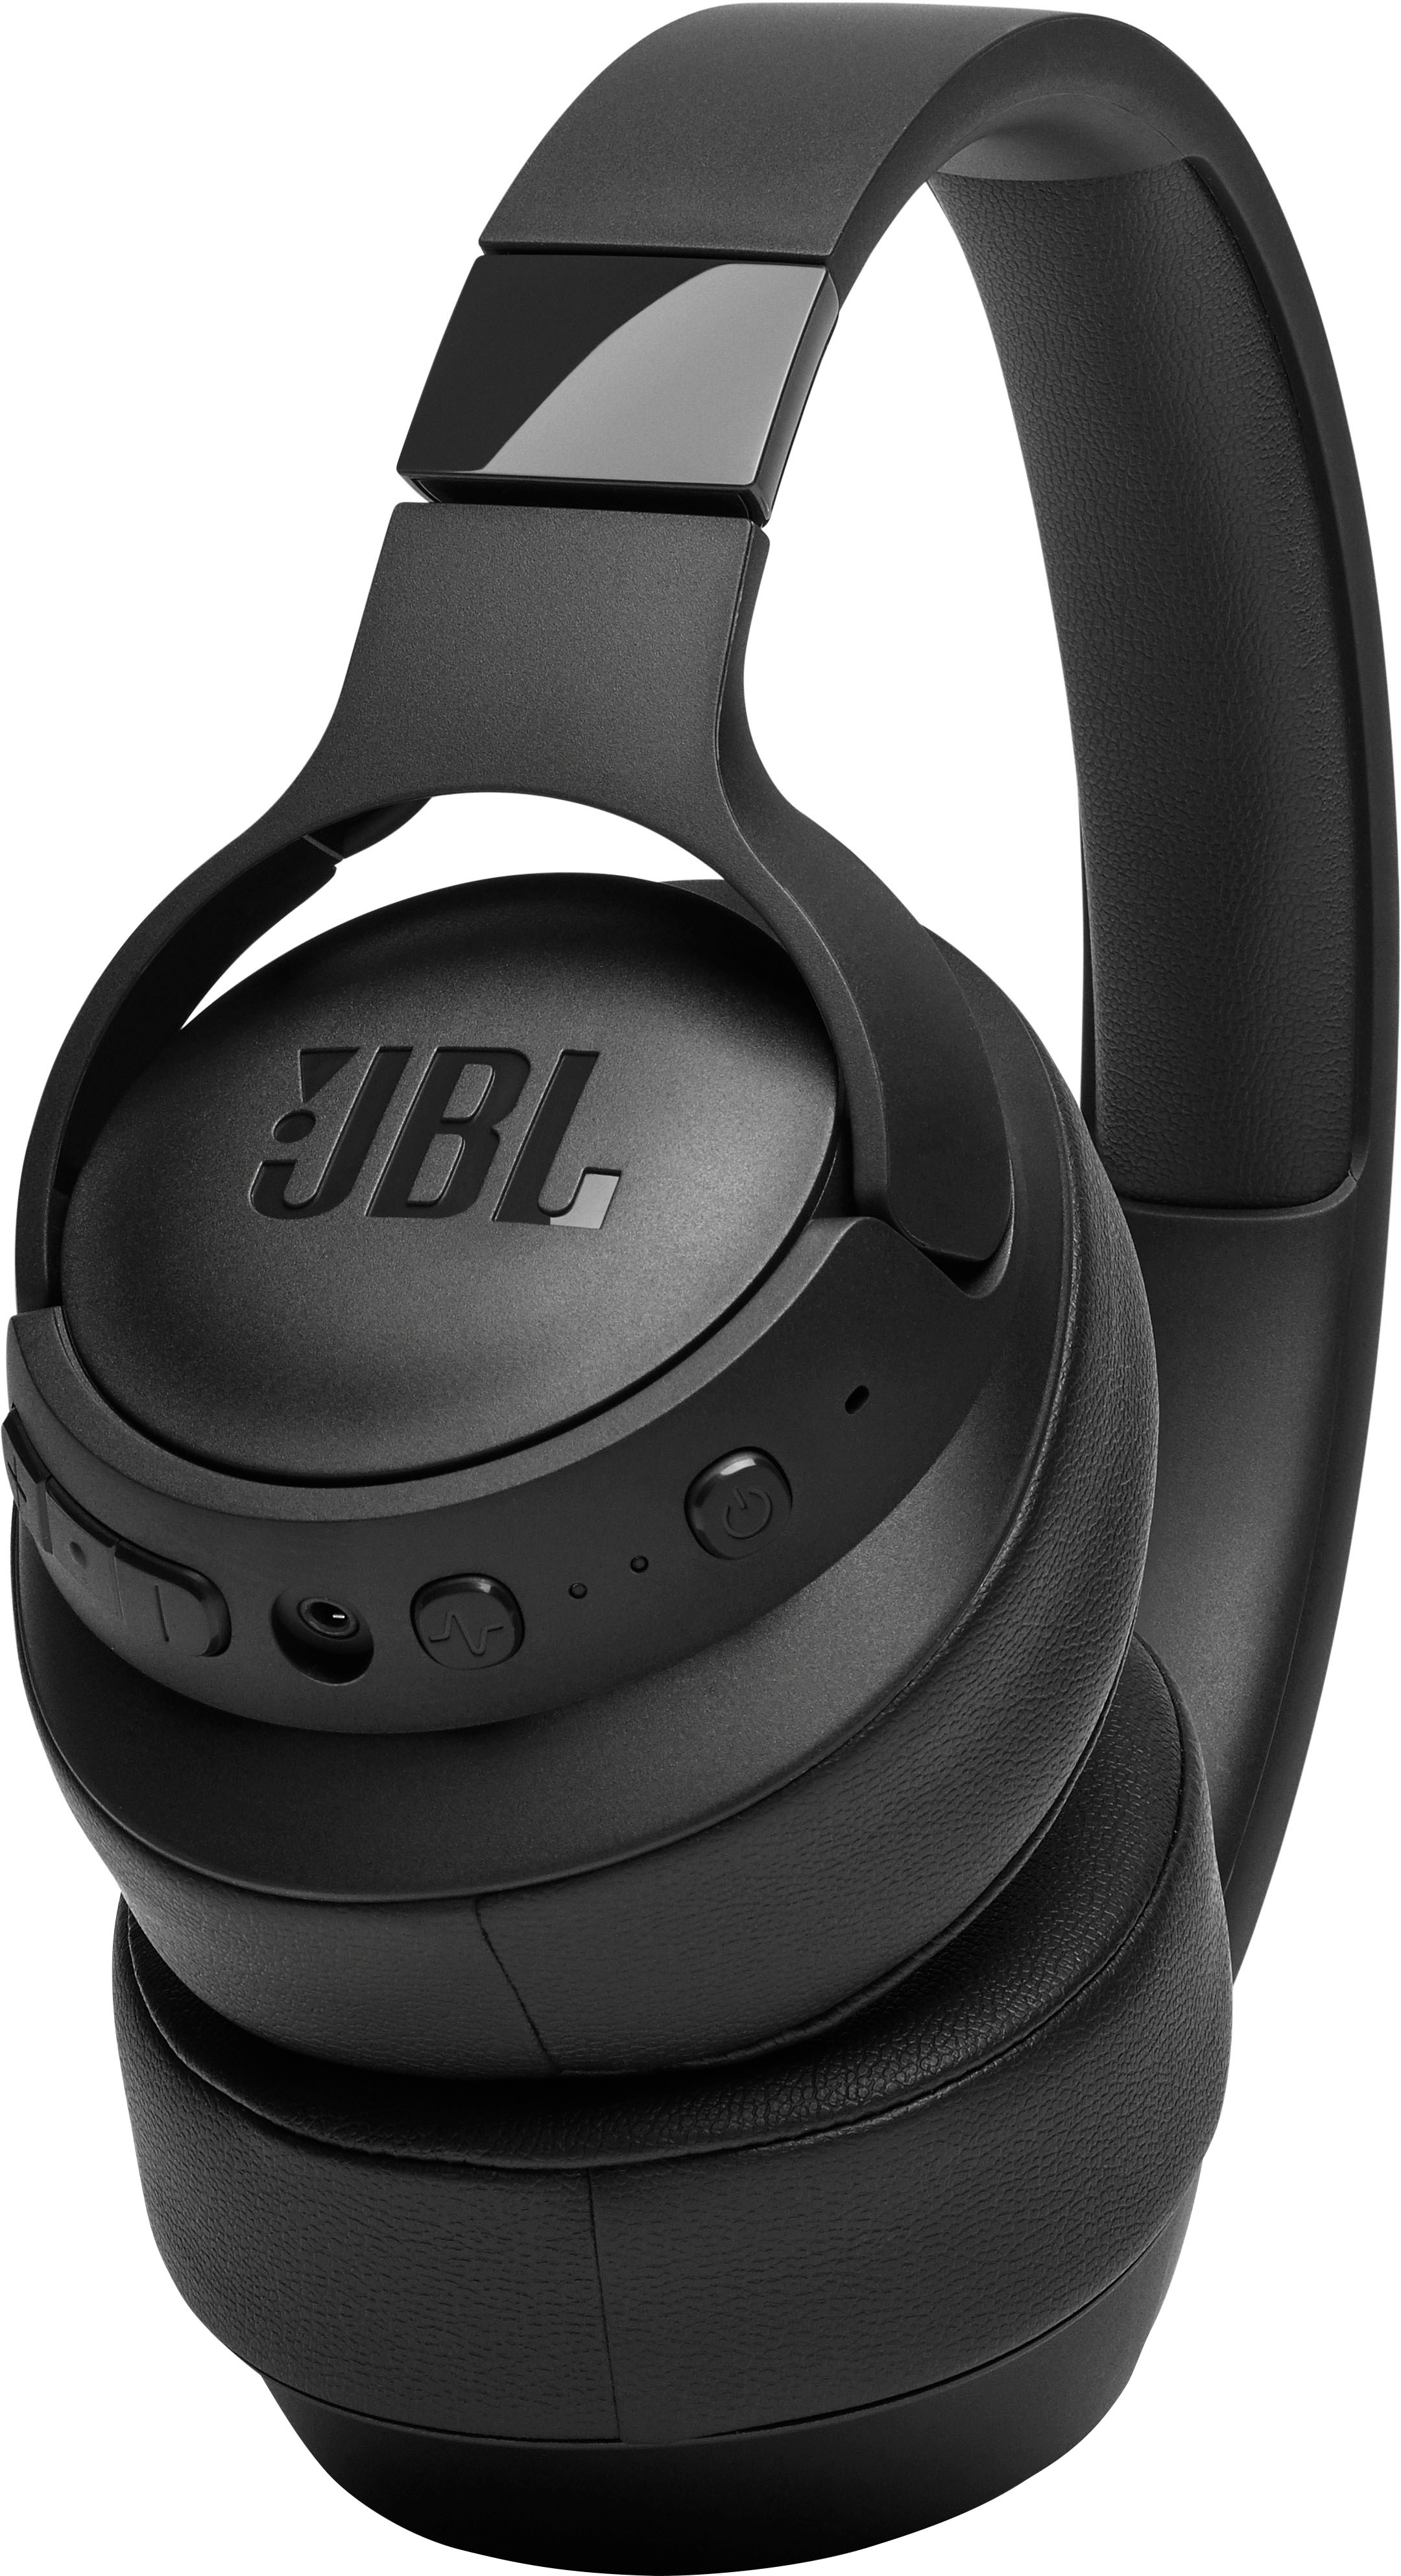 DailyMail.com tests the $100 JBL Tune 760 NC over-ear headphones and rates  how they sound